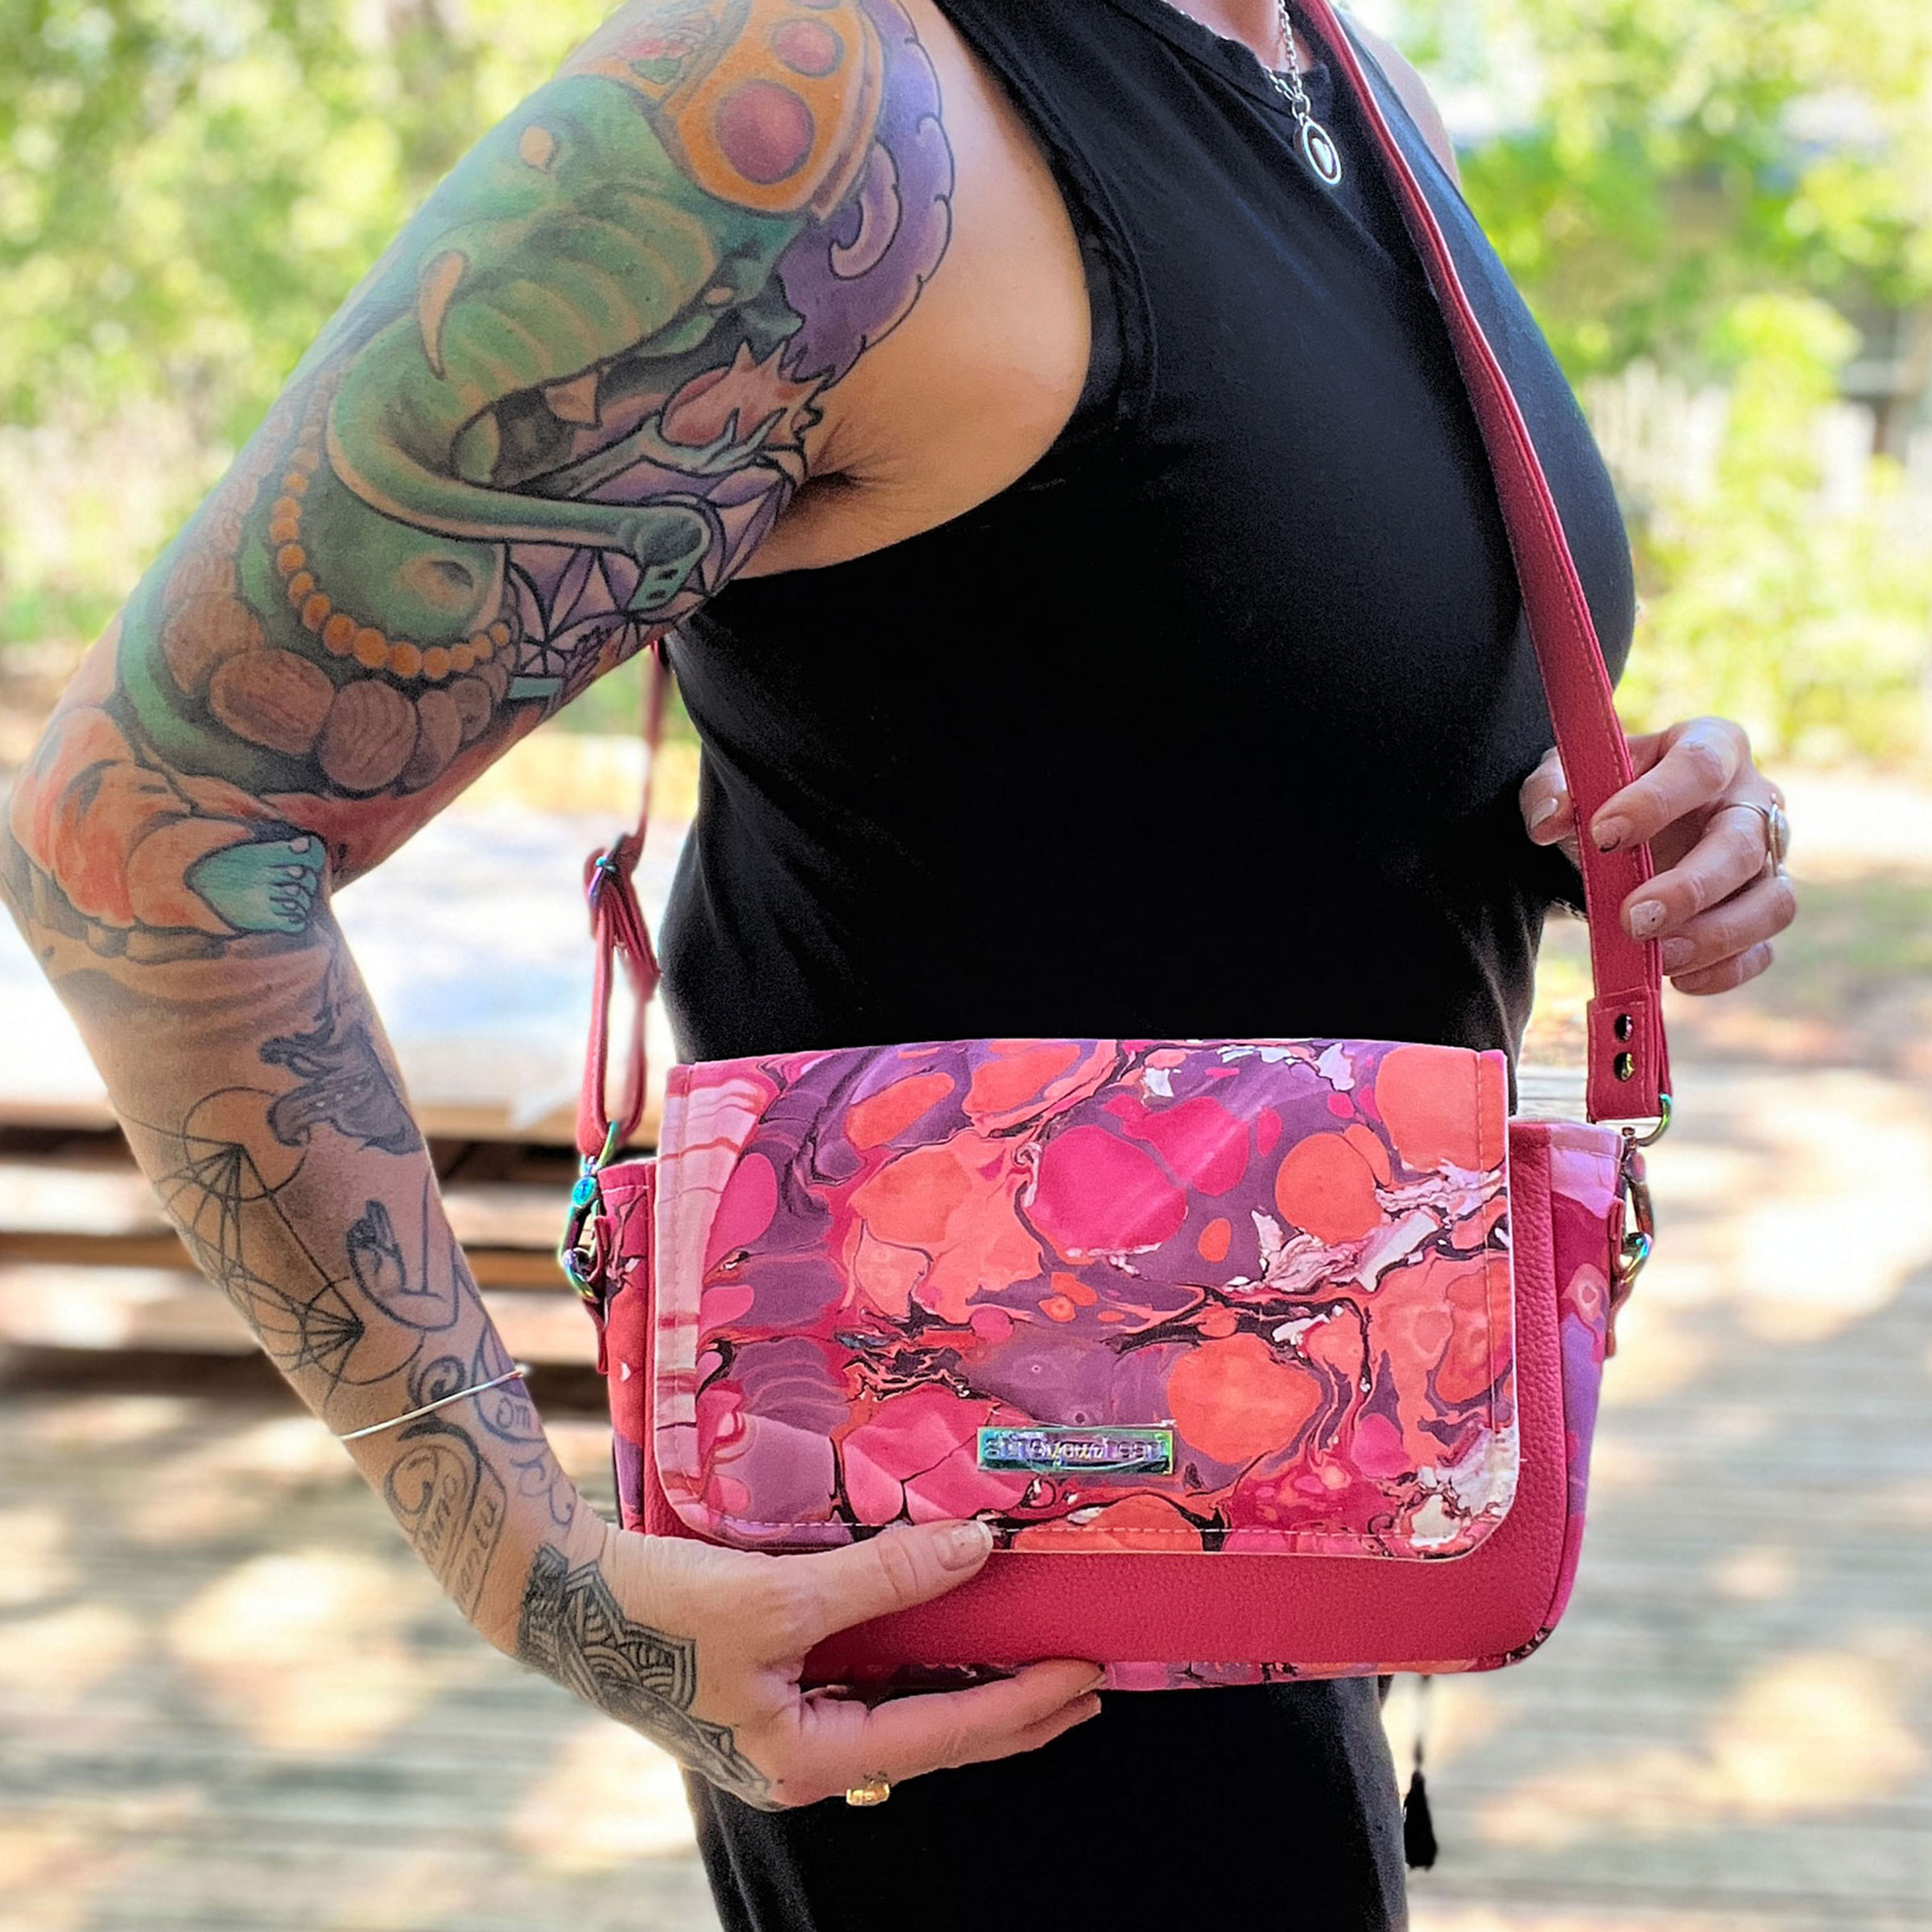 Bella Crossbody, Crossbody Bag, Water Marbled Crossbody, Shoulder Bag, Handbag, Unique Crossbody Gift For Her, Birthday Gift For Her